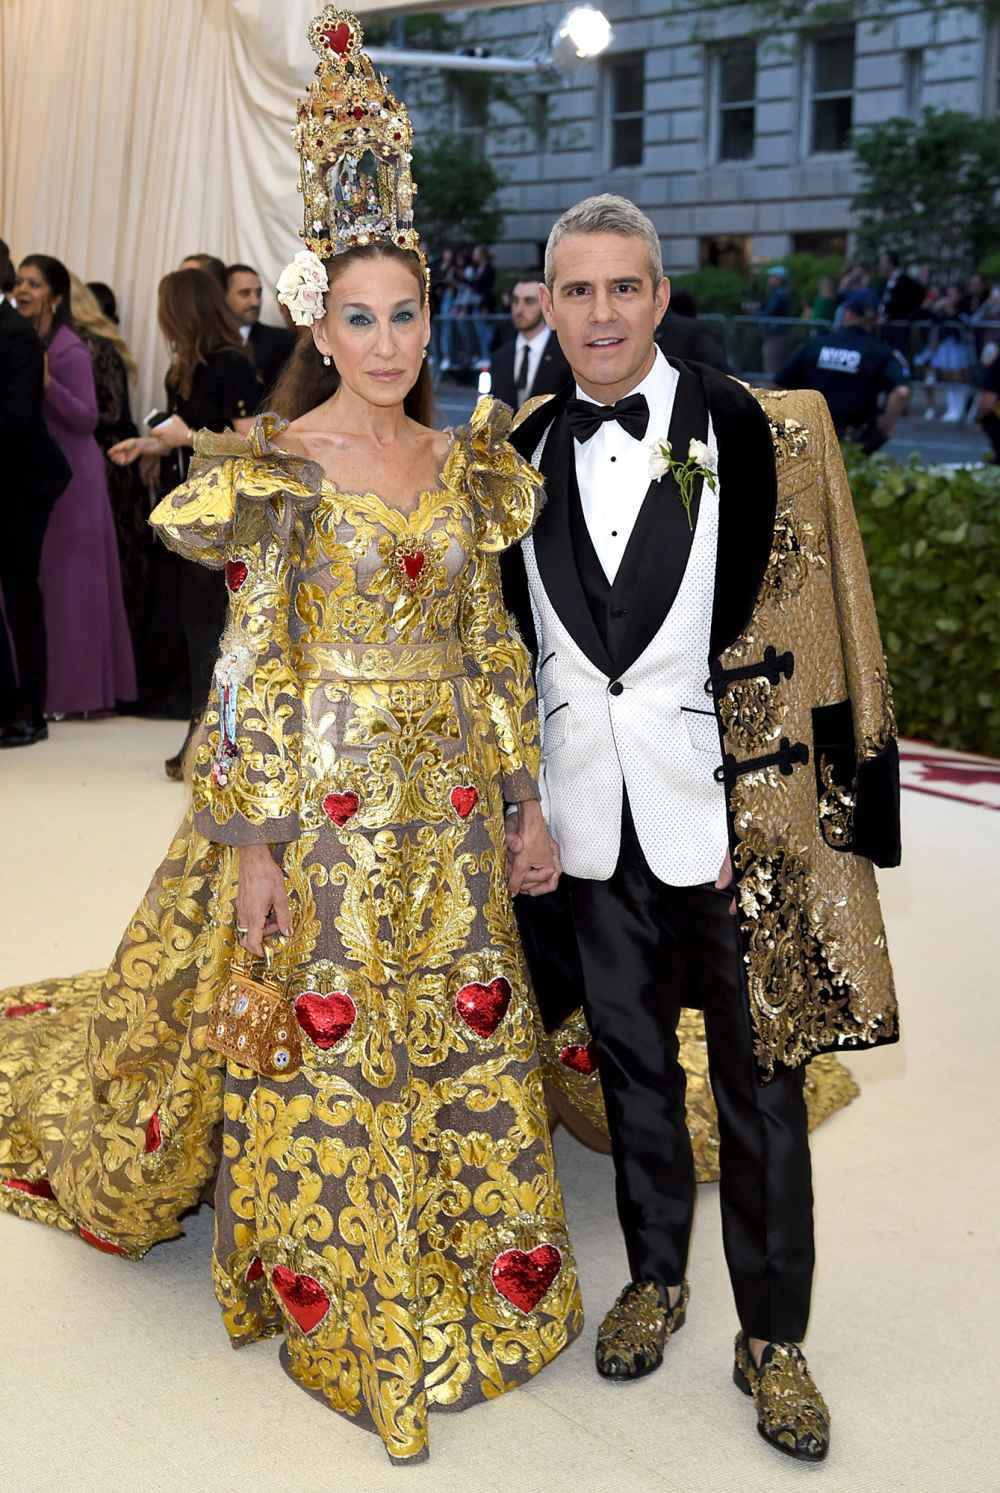 Andy Cohen and ‘Date’ Sarah Jessica Parker Might Be Skipping the 2021 Met Gala — Here’s Why